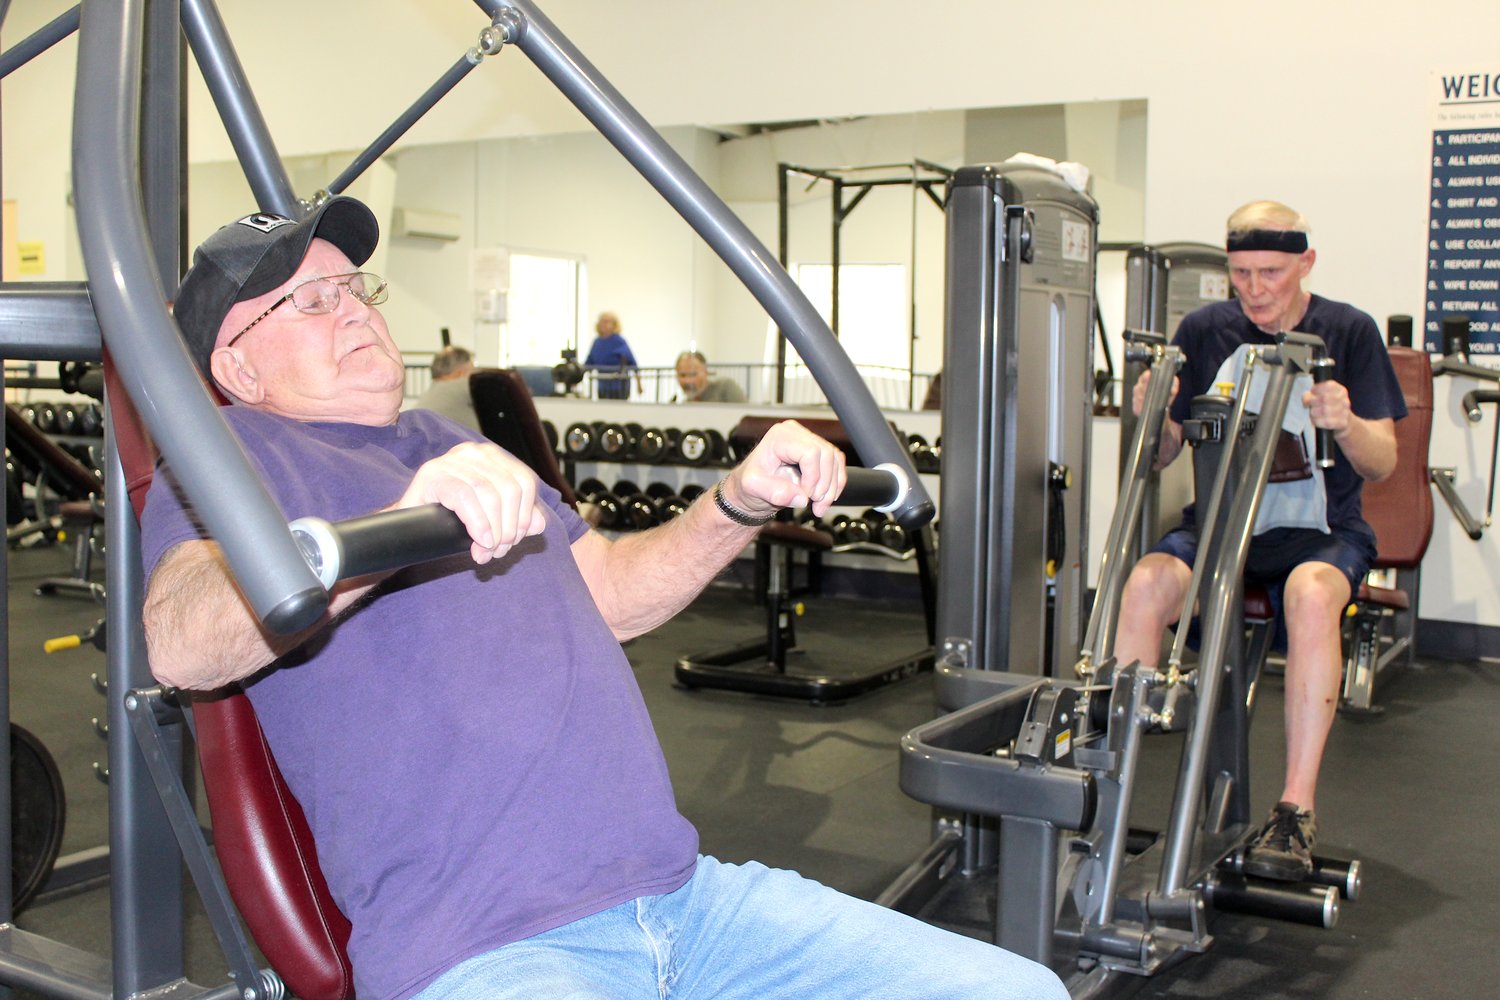 Staying young is a state of mind, according to Crawfordsville residents Ron Williams (left), 84, and Jack Shaffer, 70, who utilize the weight room at the Crawfordsville Community Center Monday. Williams, whose family has a history of diabetes, gives his workout and the Center credit for his ability to avoid the disease.